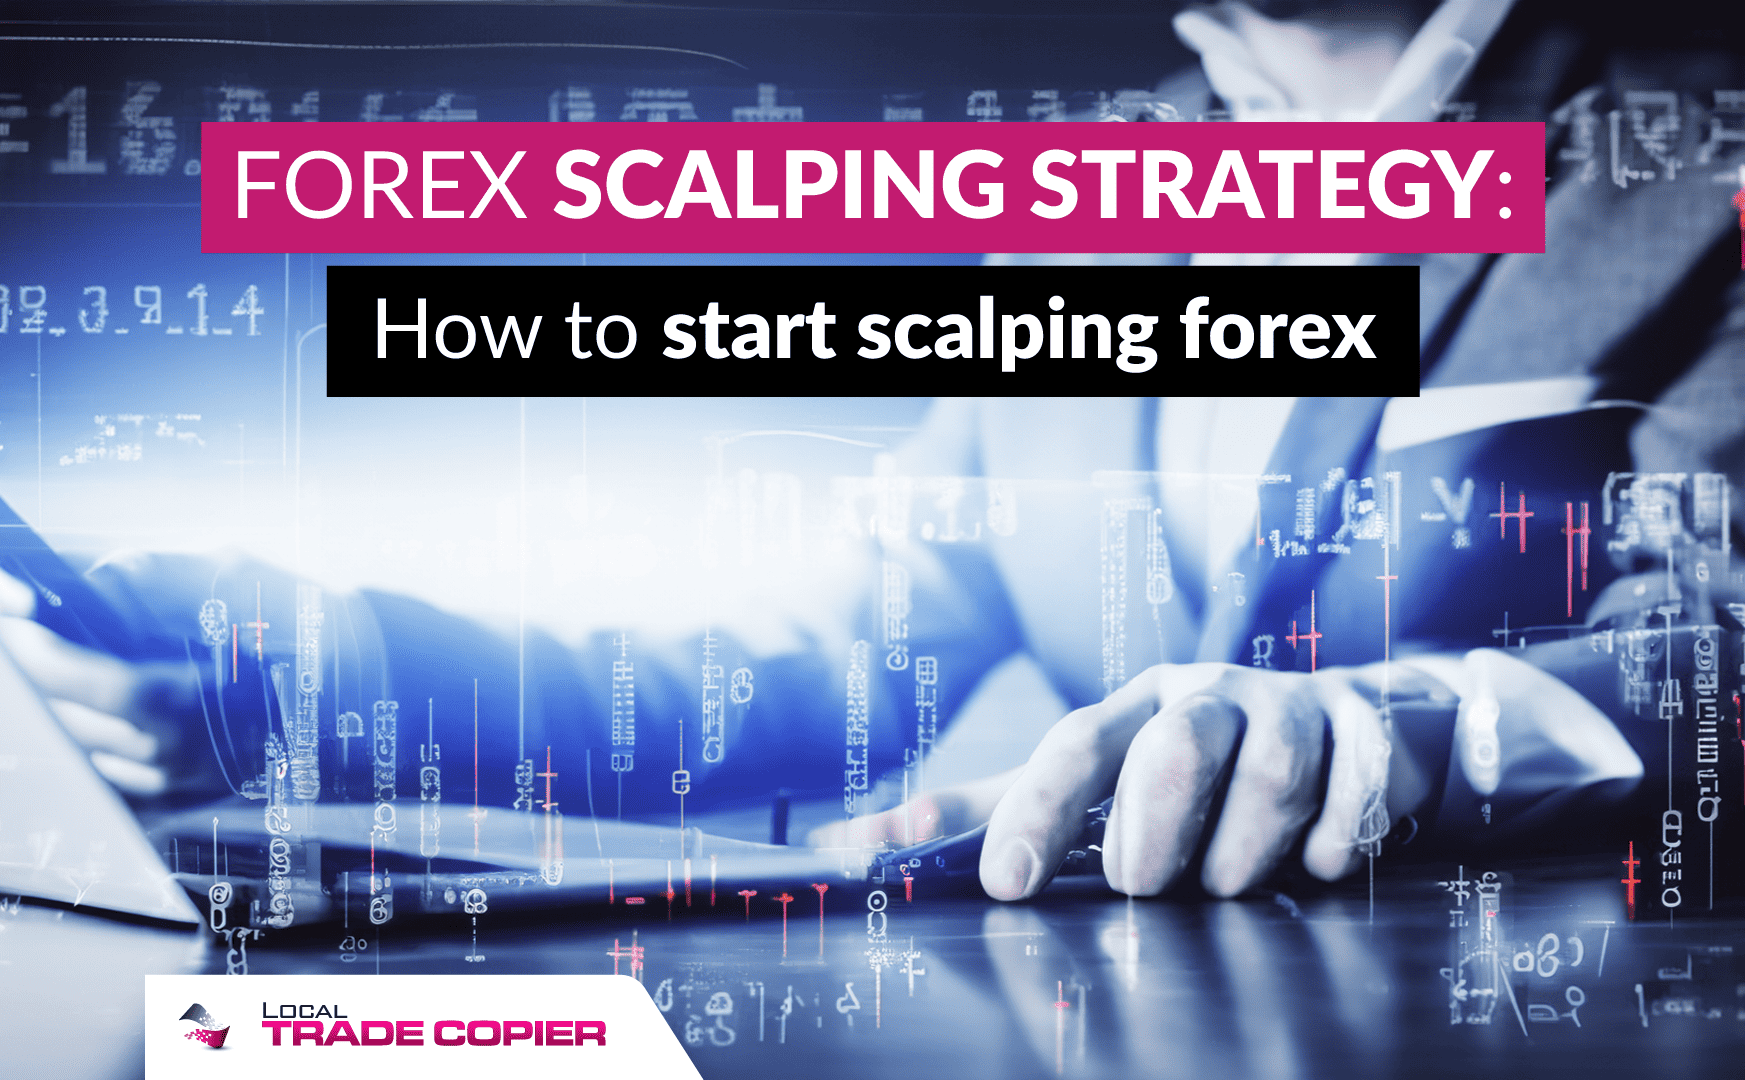 Forex scalping strategy: How to start scalping forex